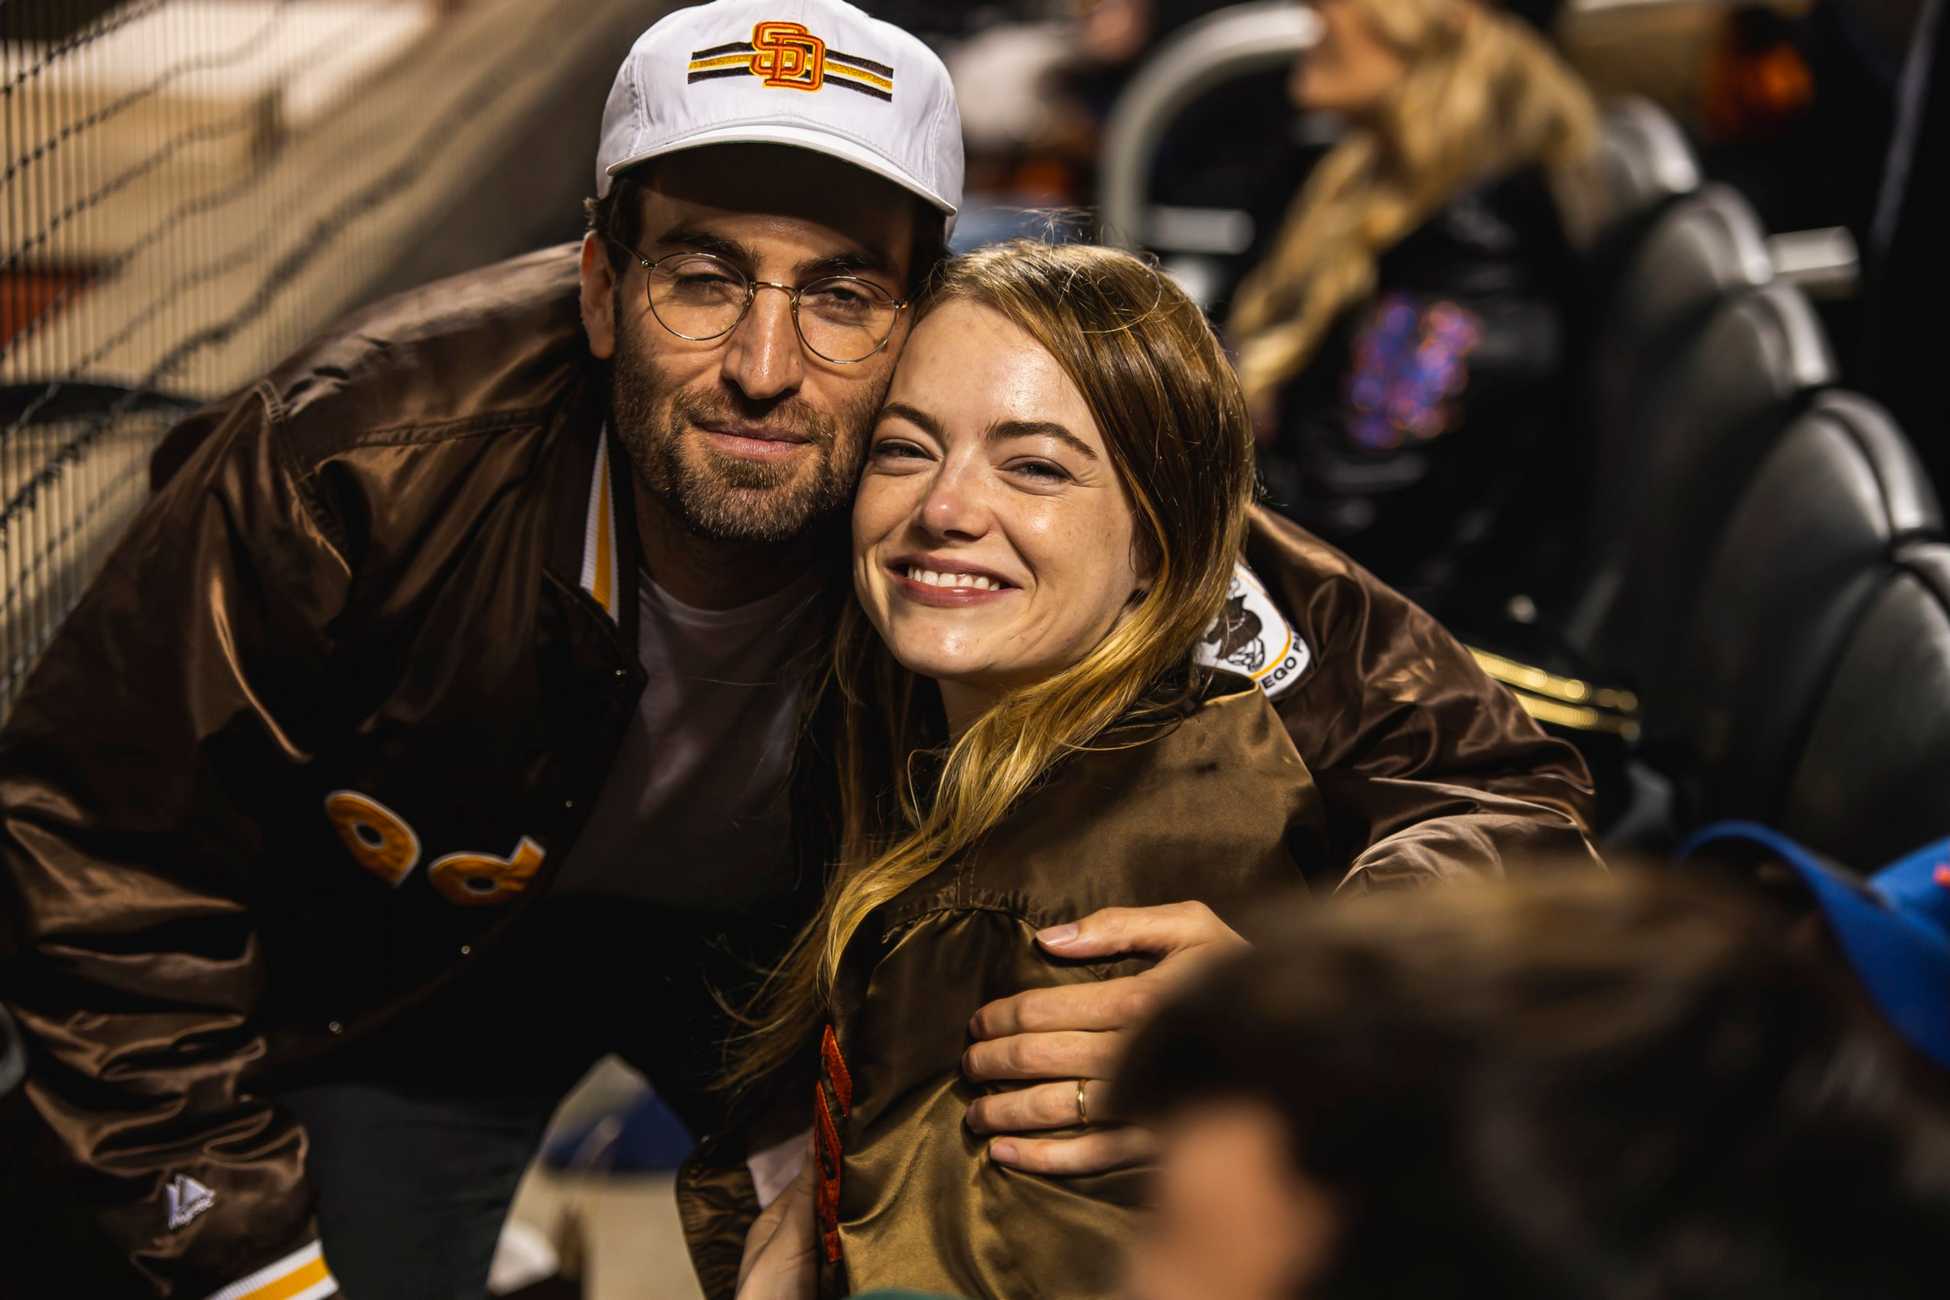 Emma Stone flaunts her love for the Padres and gets booed at Citi Field